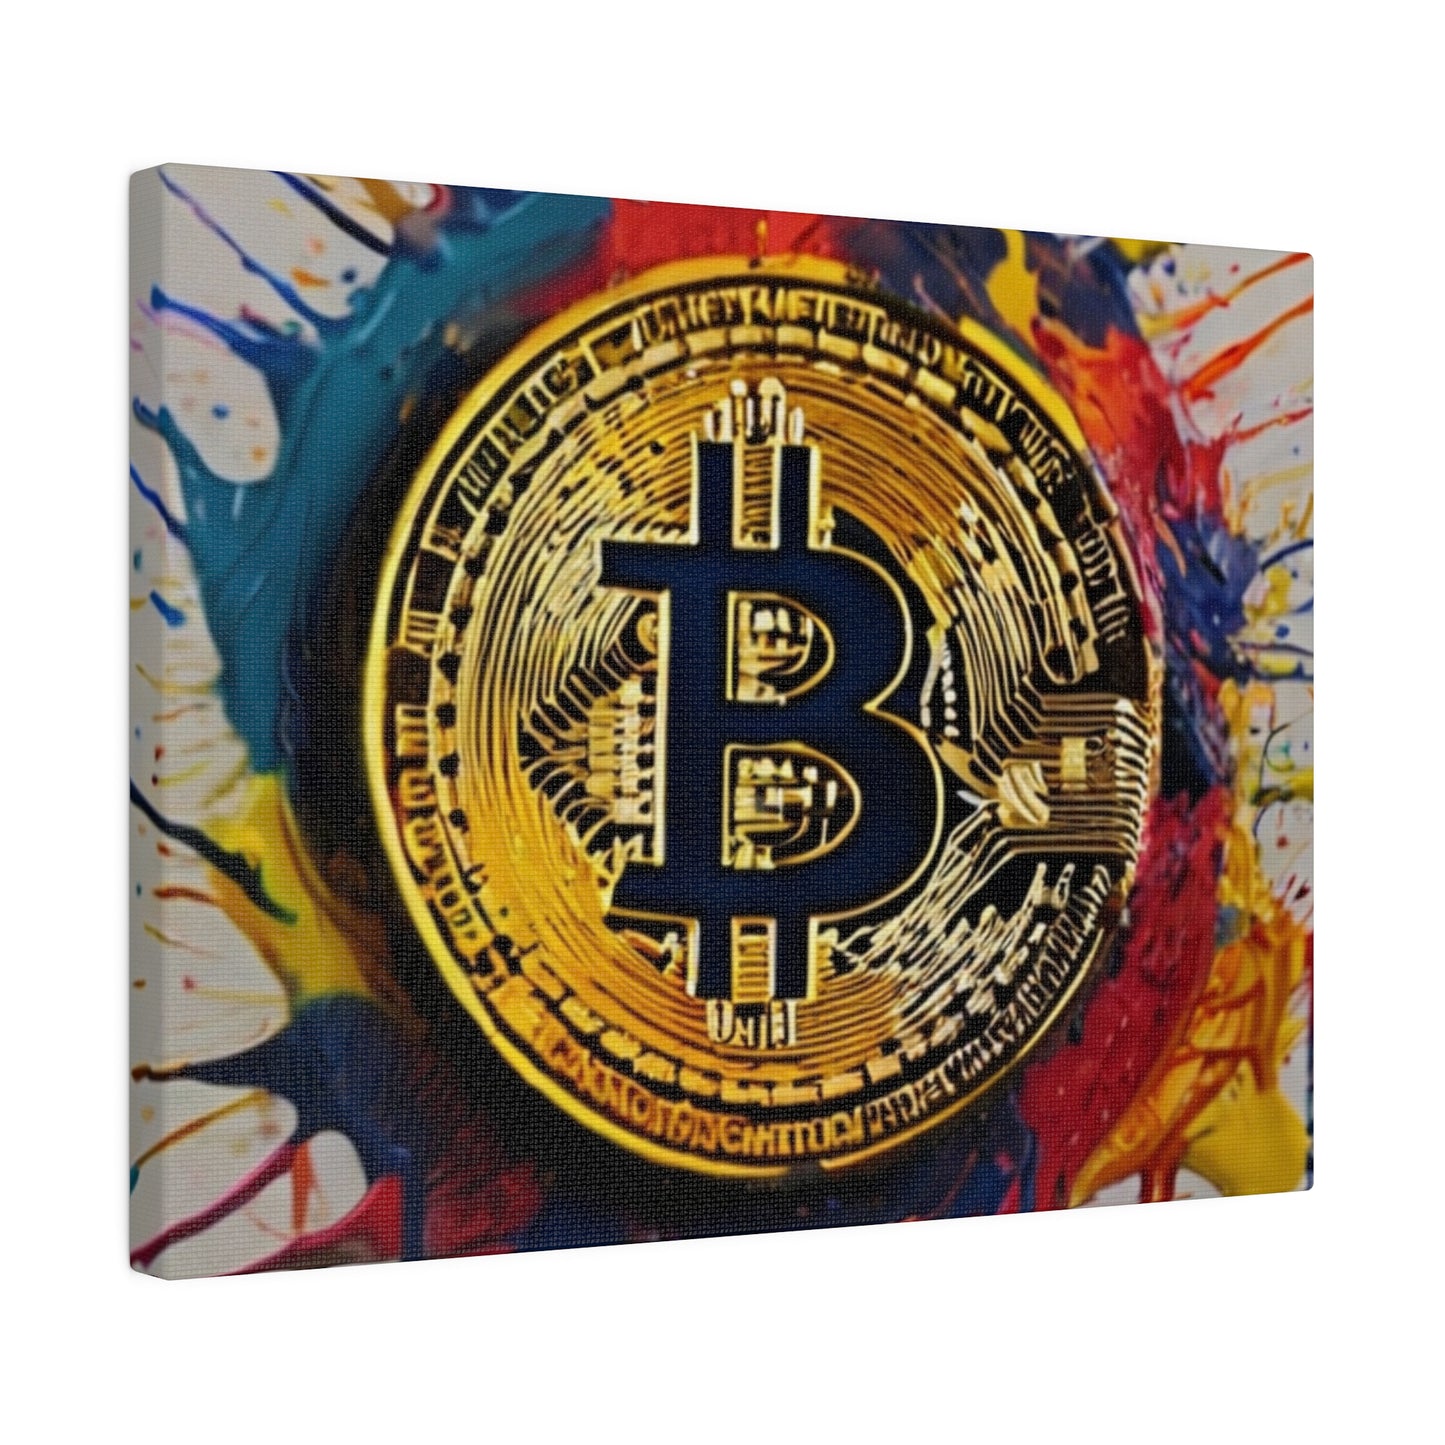 Messy Bitcoin - Matte Canvas, Stretched, 0.75"